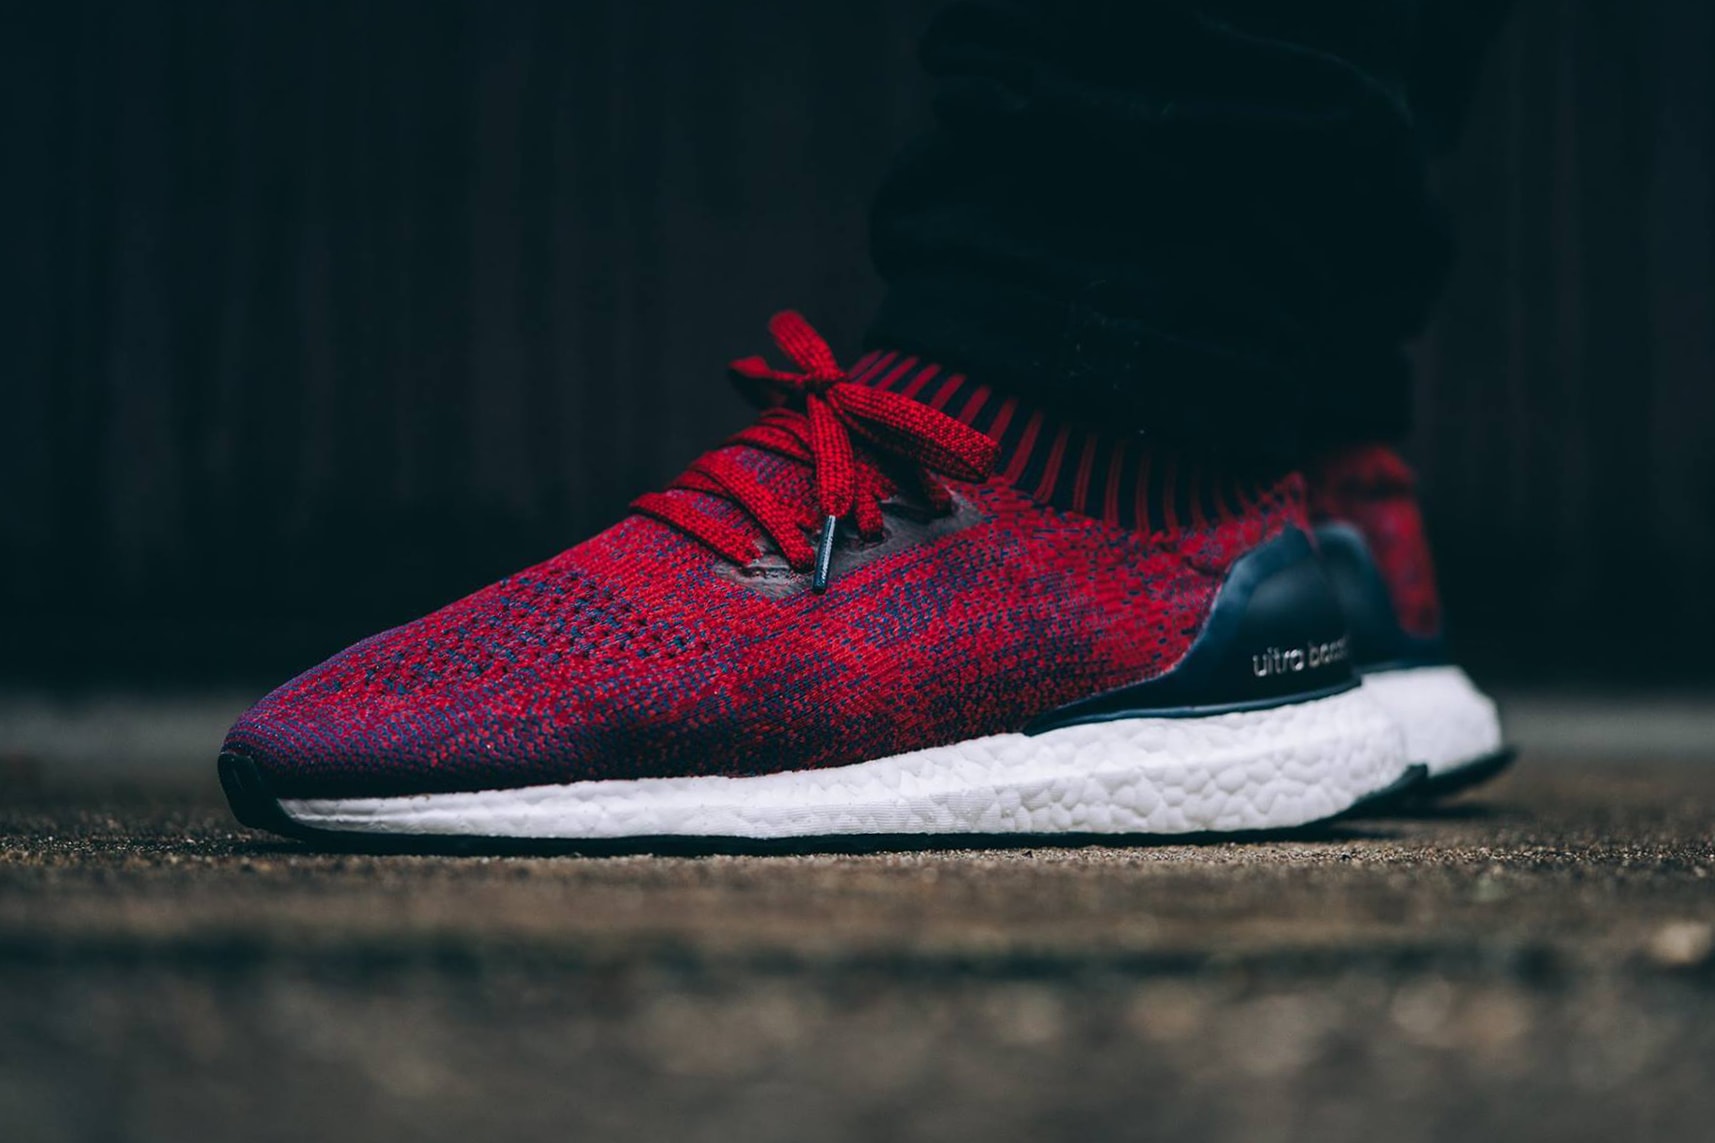 adidas UltraBOOST Uncaged "Mystery Red" A Closer Look Three Stripes Germany